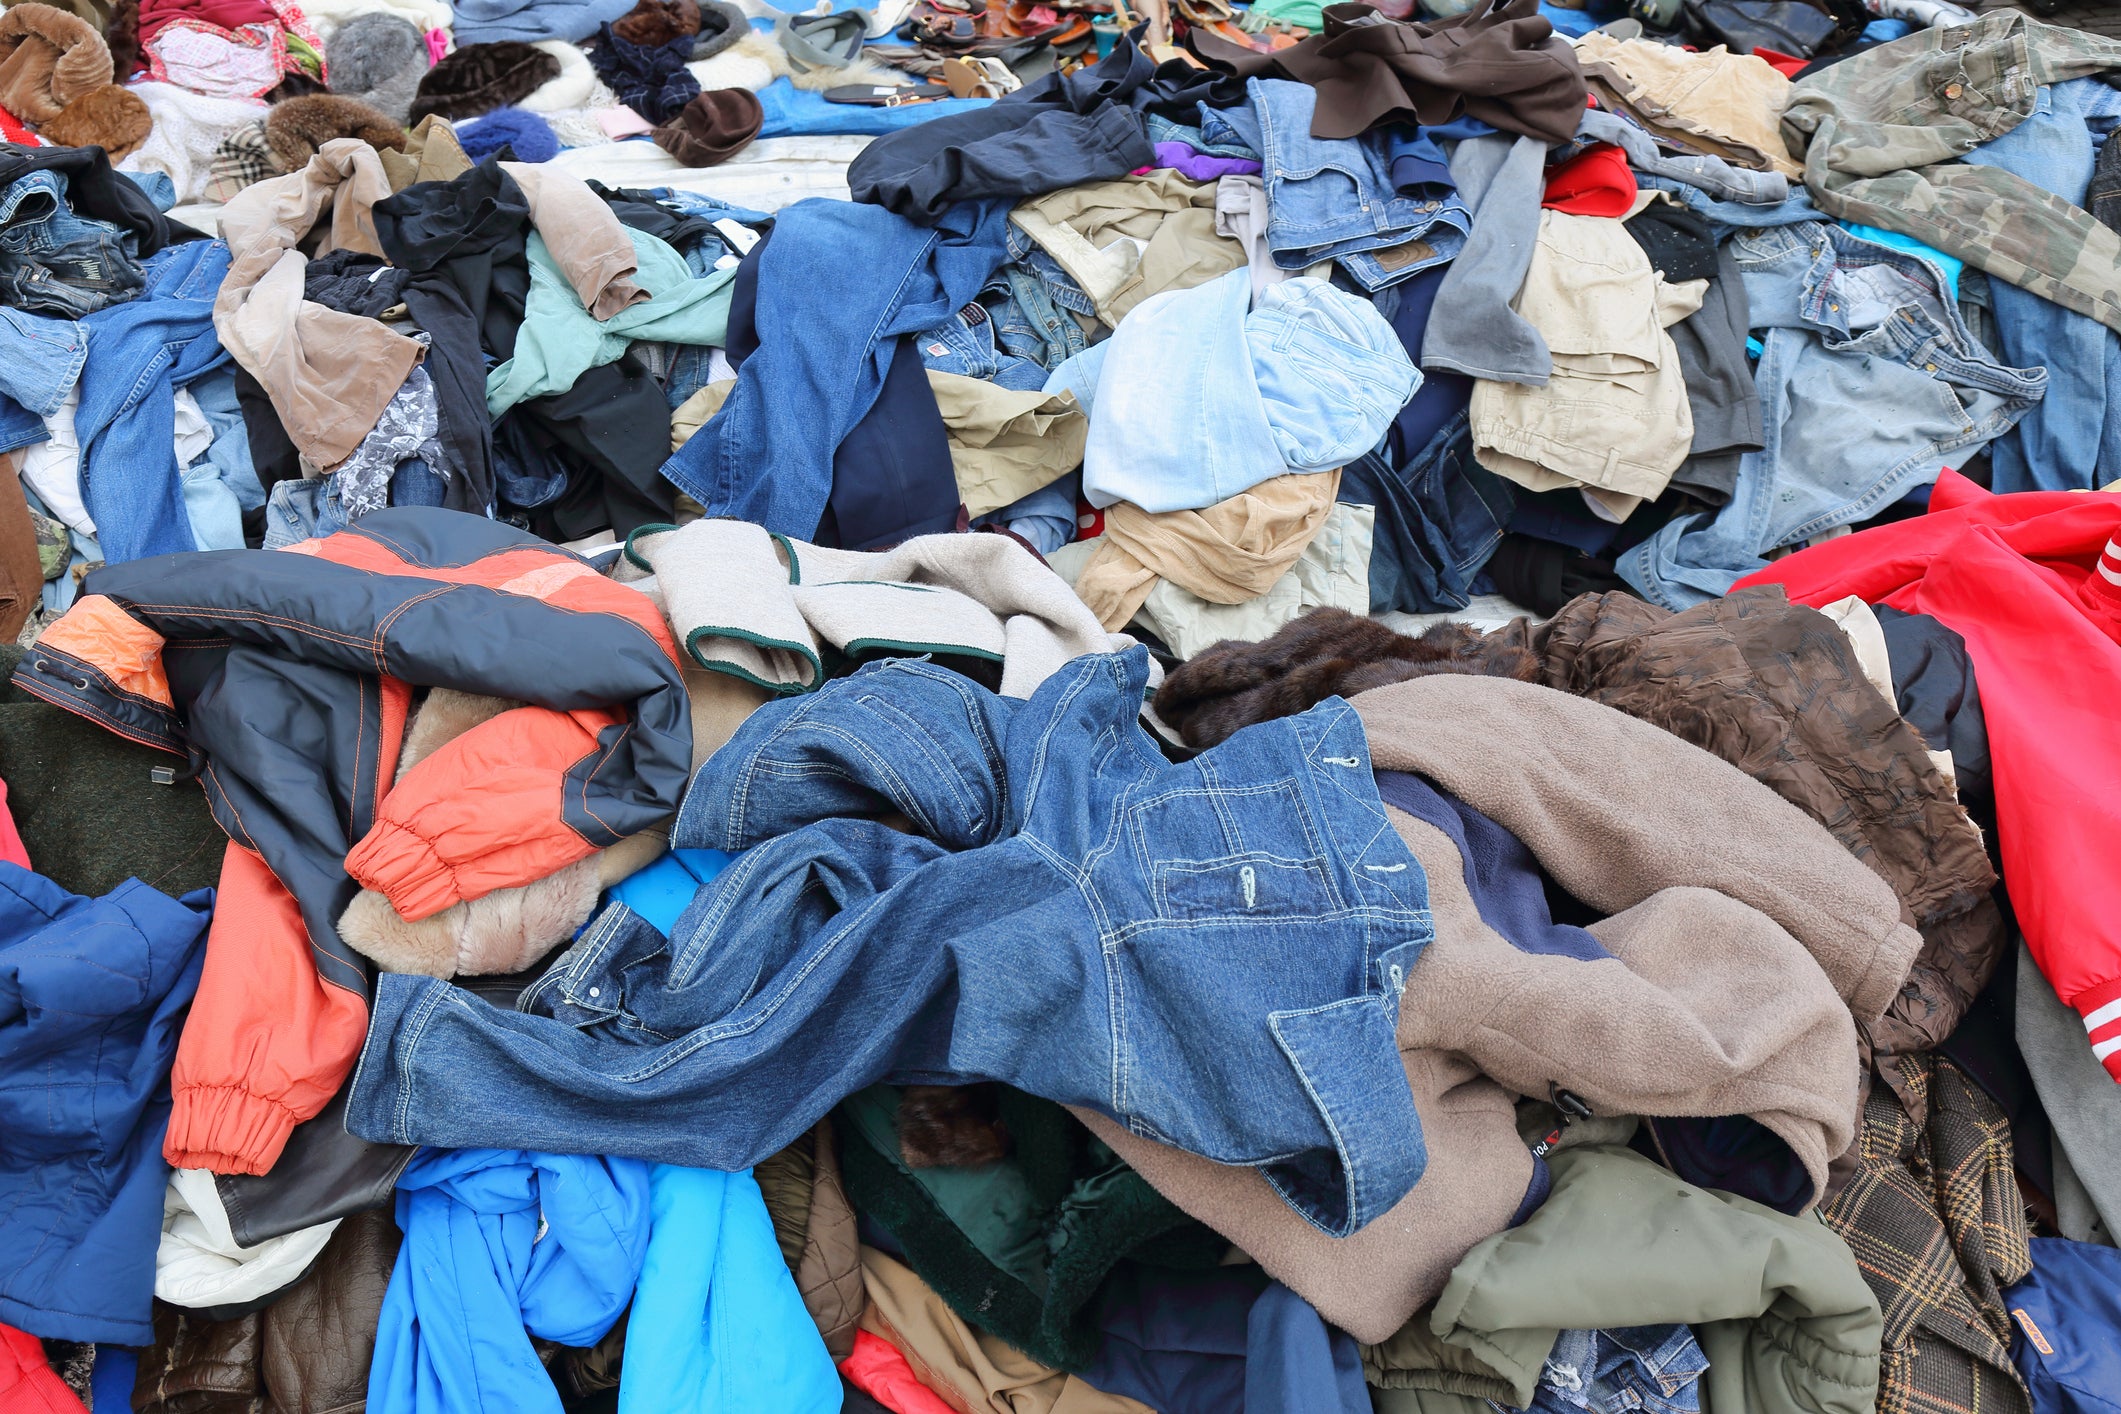 Textile waste from the fashion industry is a huge polluter